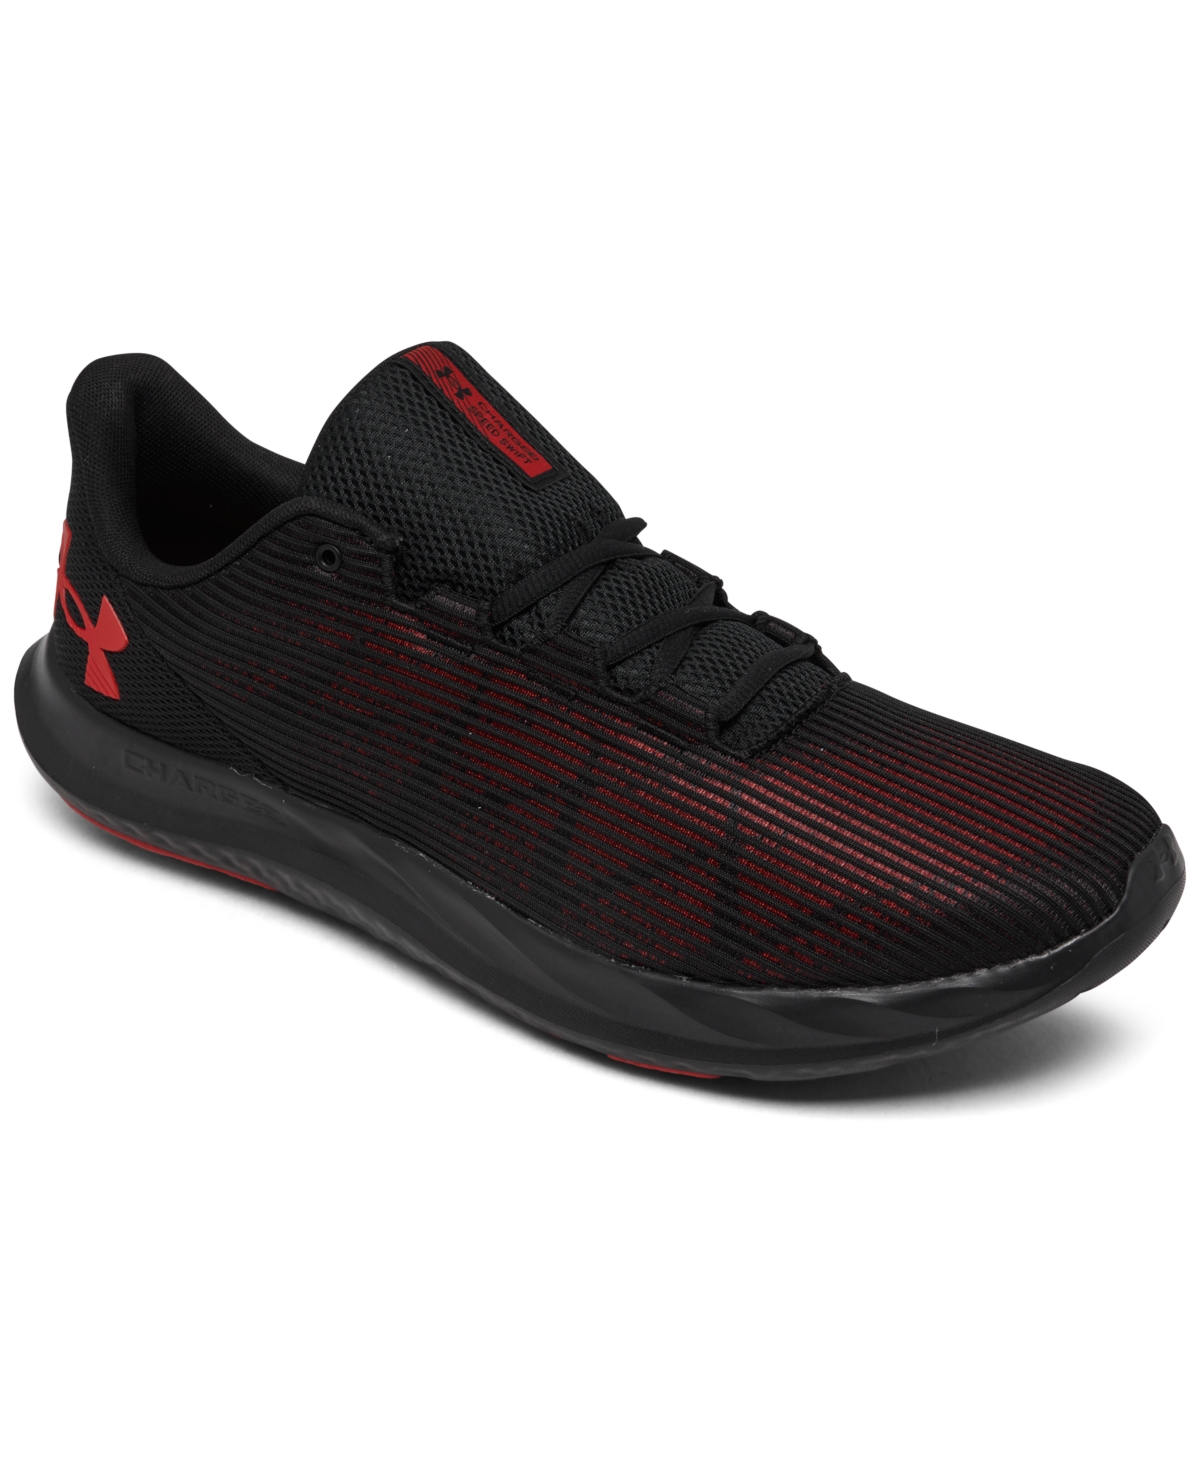 Men's Speed Swift Running Sneakers from Finish Line - Black/Red